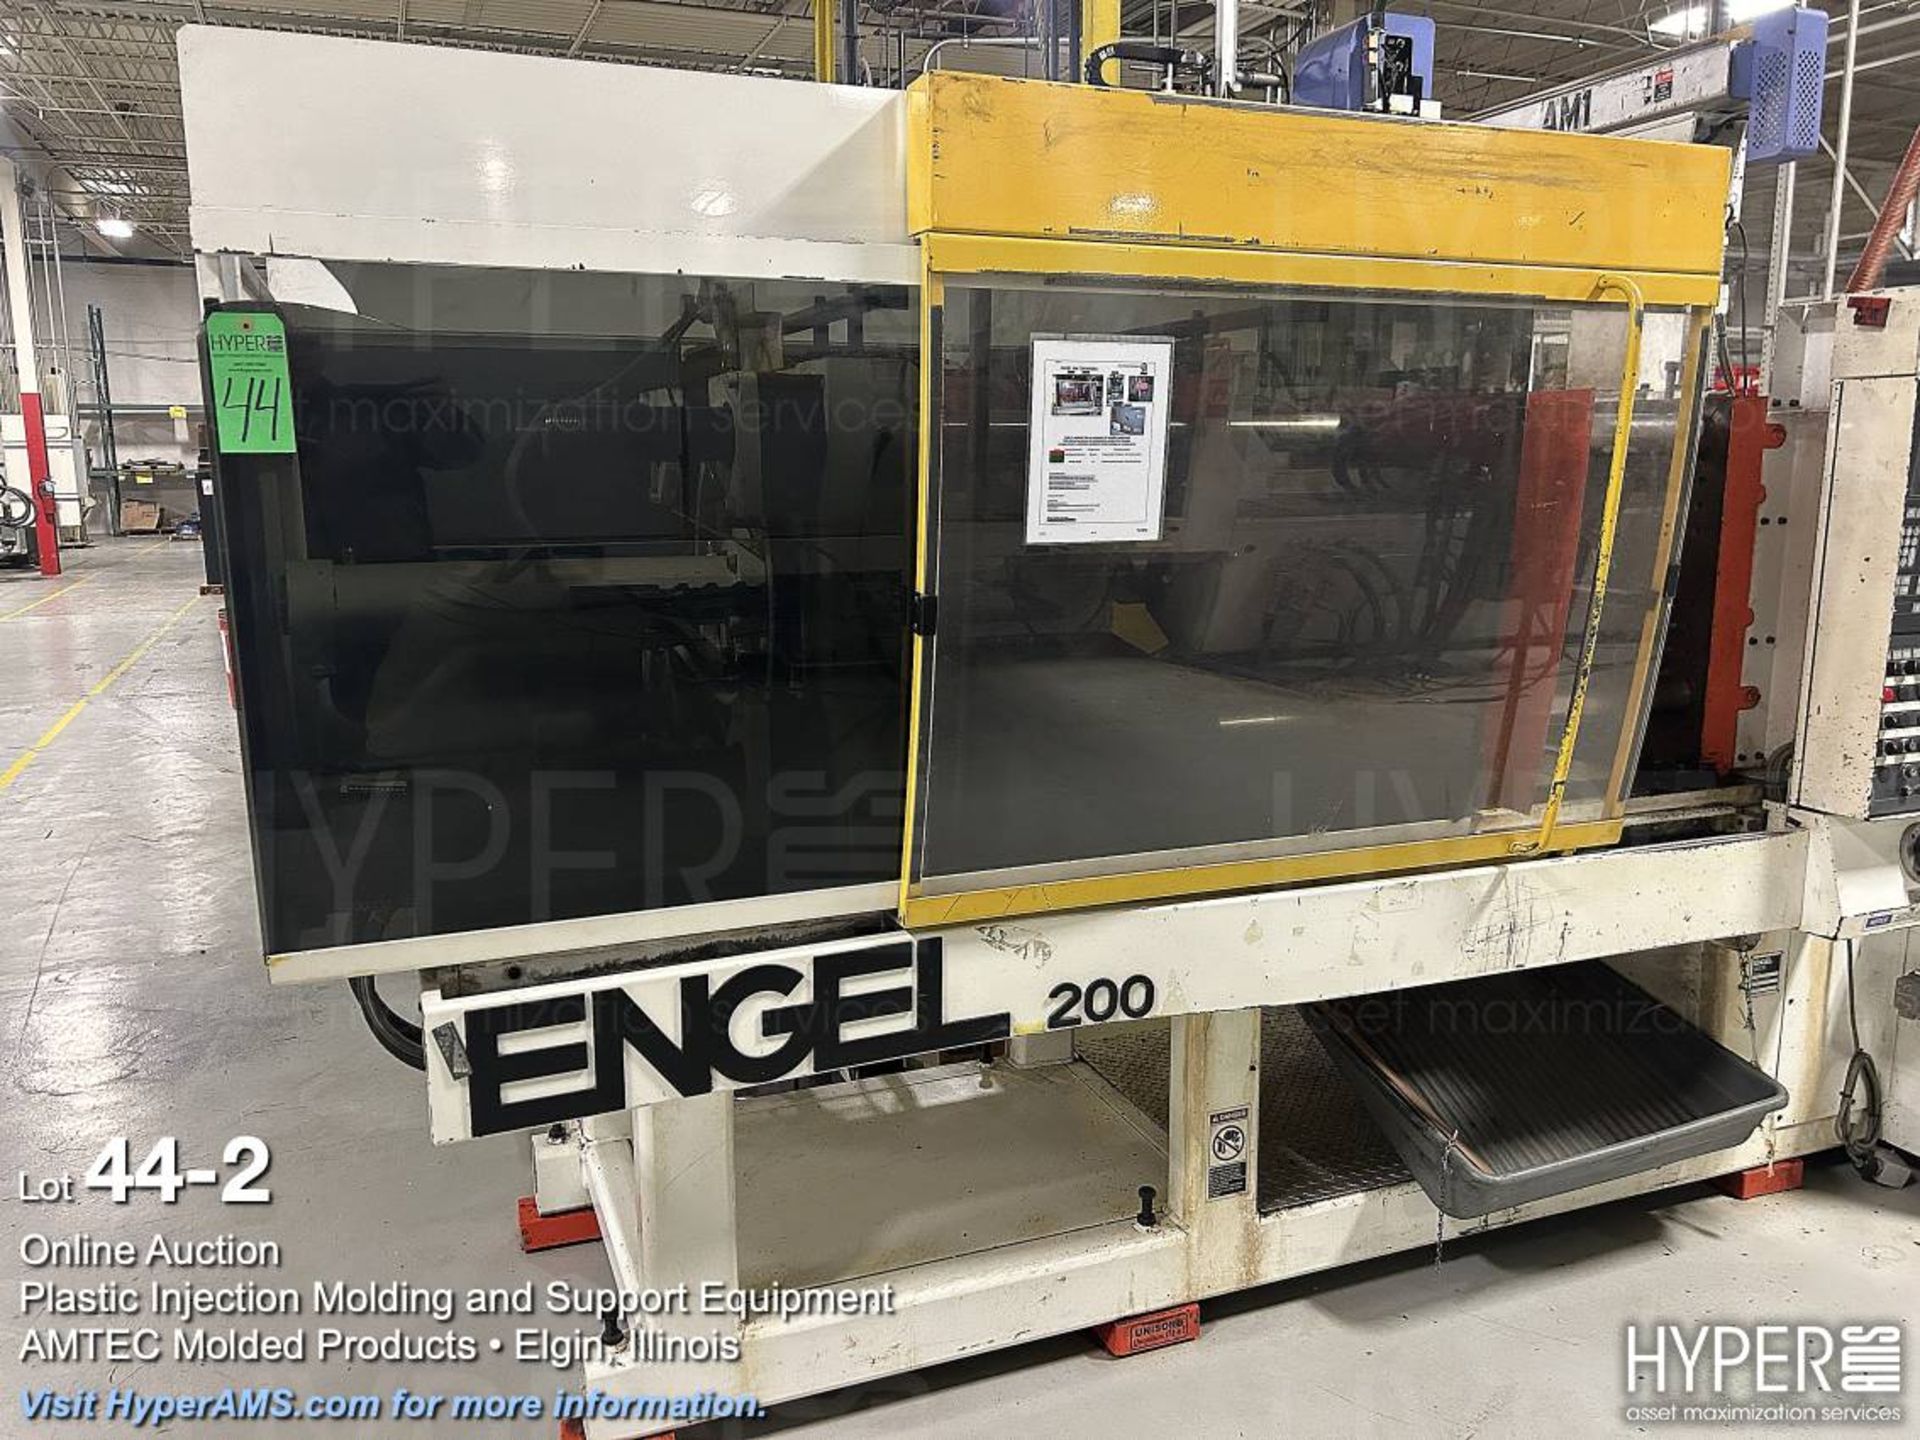 Engel ES750/200AH toggle clamp plastic injection molding machine - Image 2 of 16